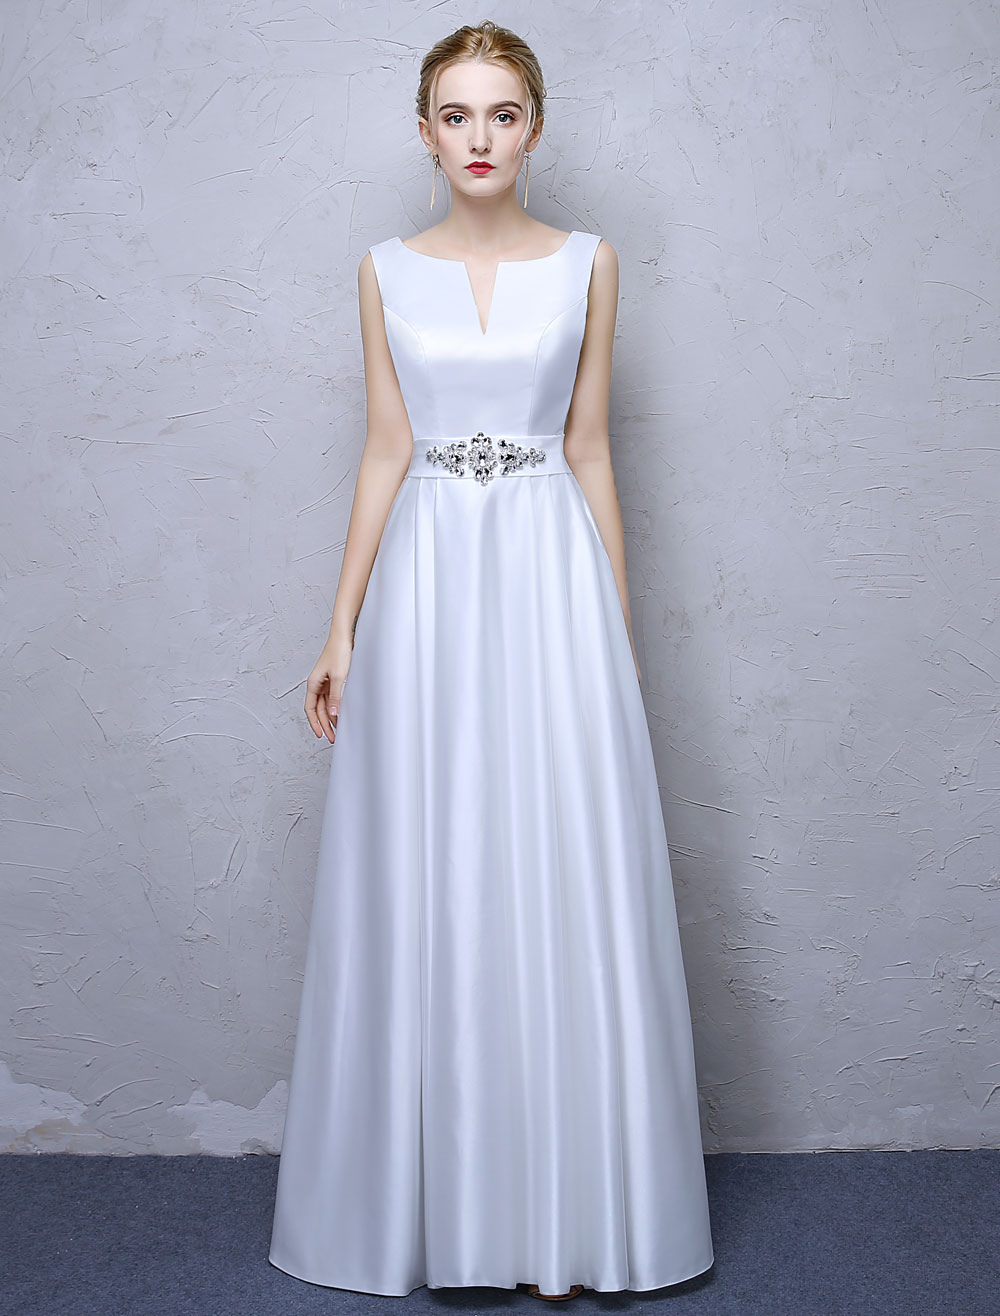 White Prom Dresses Satin Long Formal Dress Notched Neckline Rhinestones Beaded Sash Floor Length Formal Gowns (Wedding Cheap Party Dress) photo